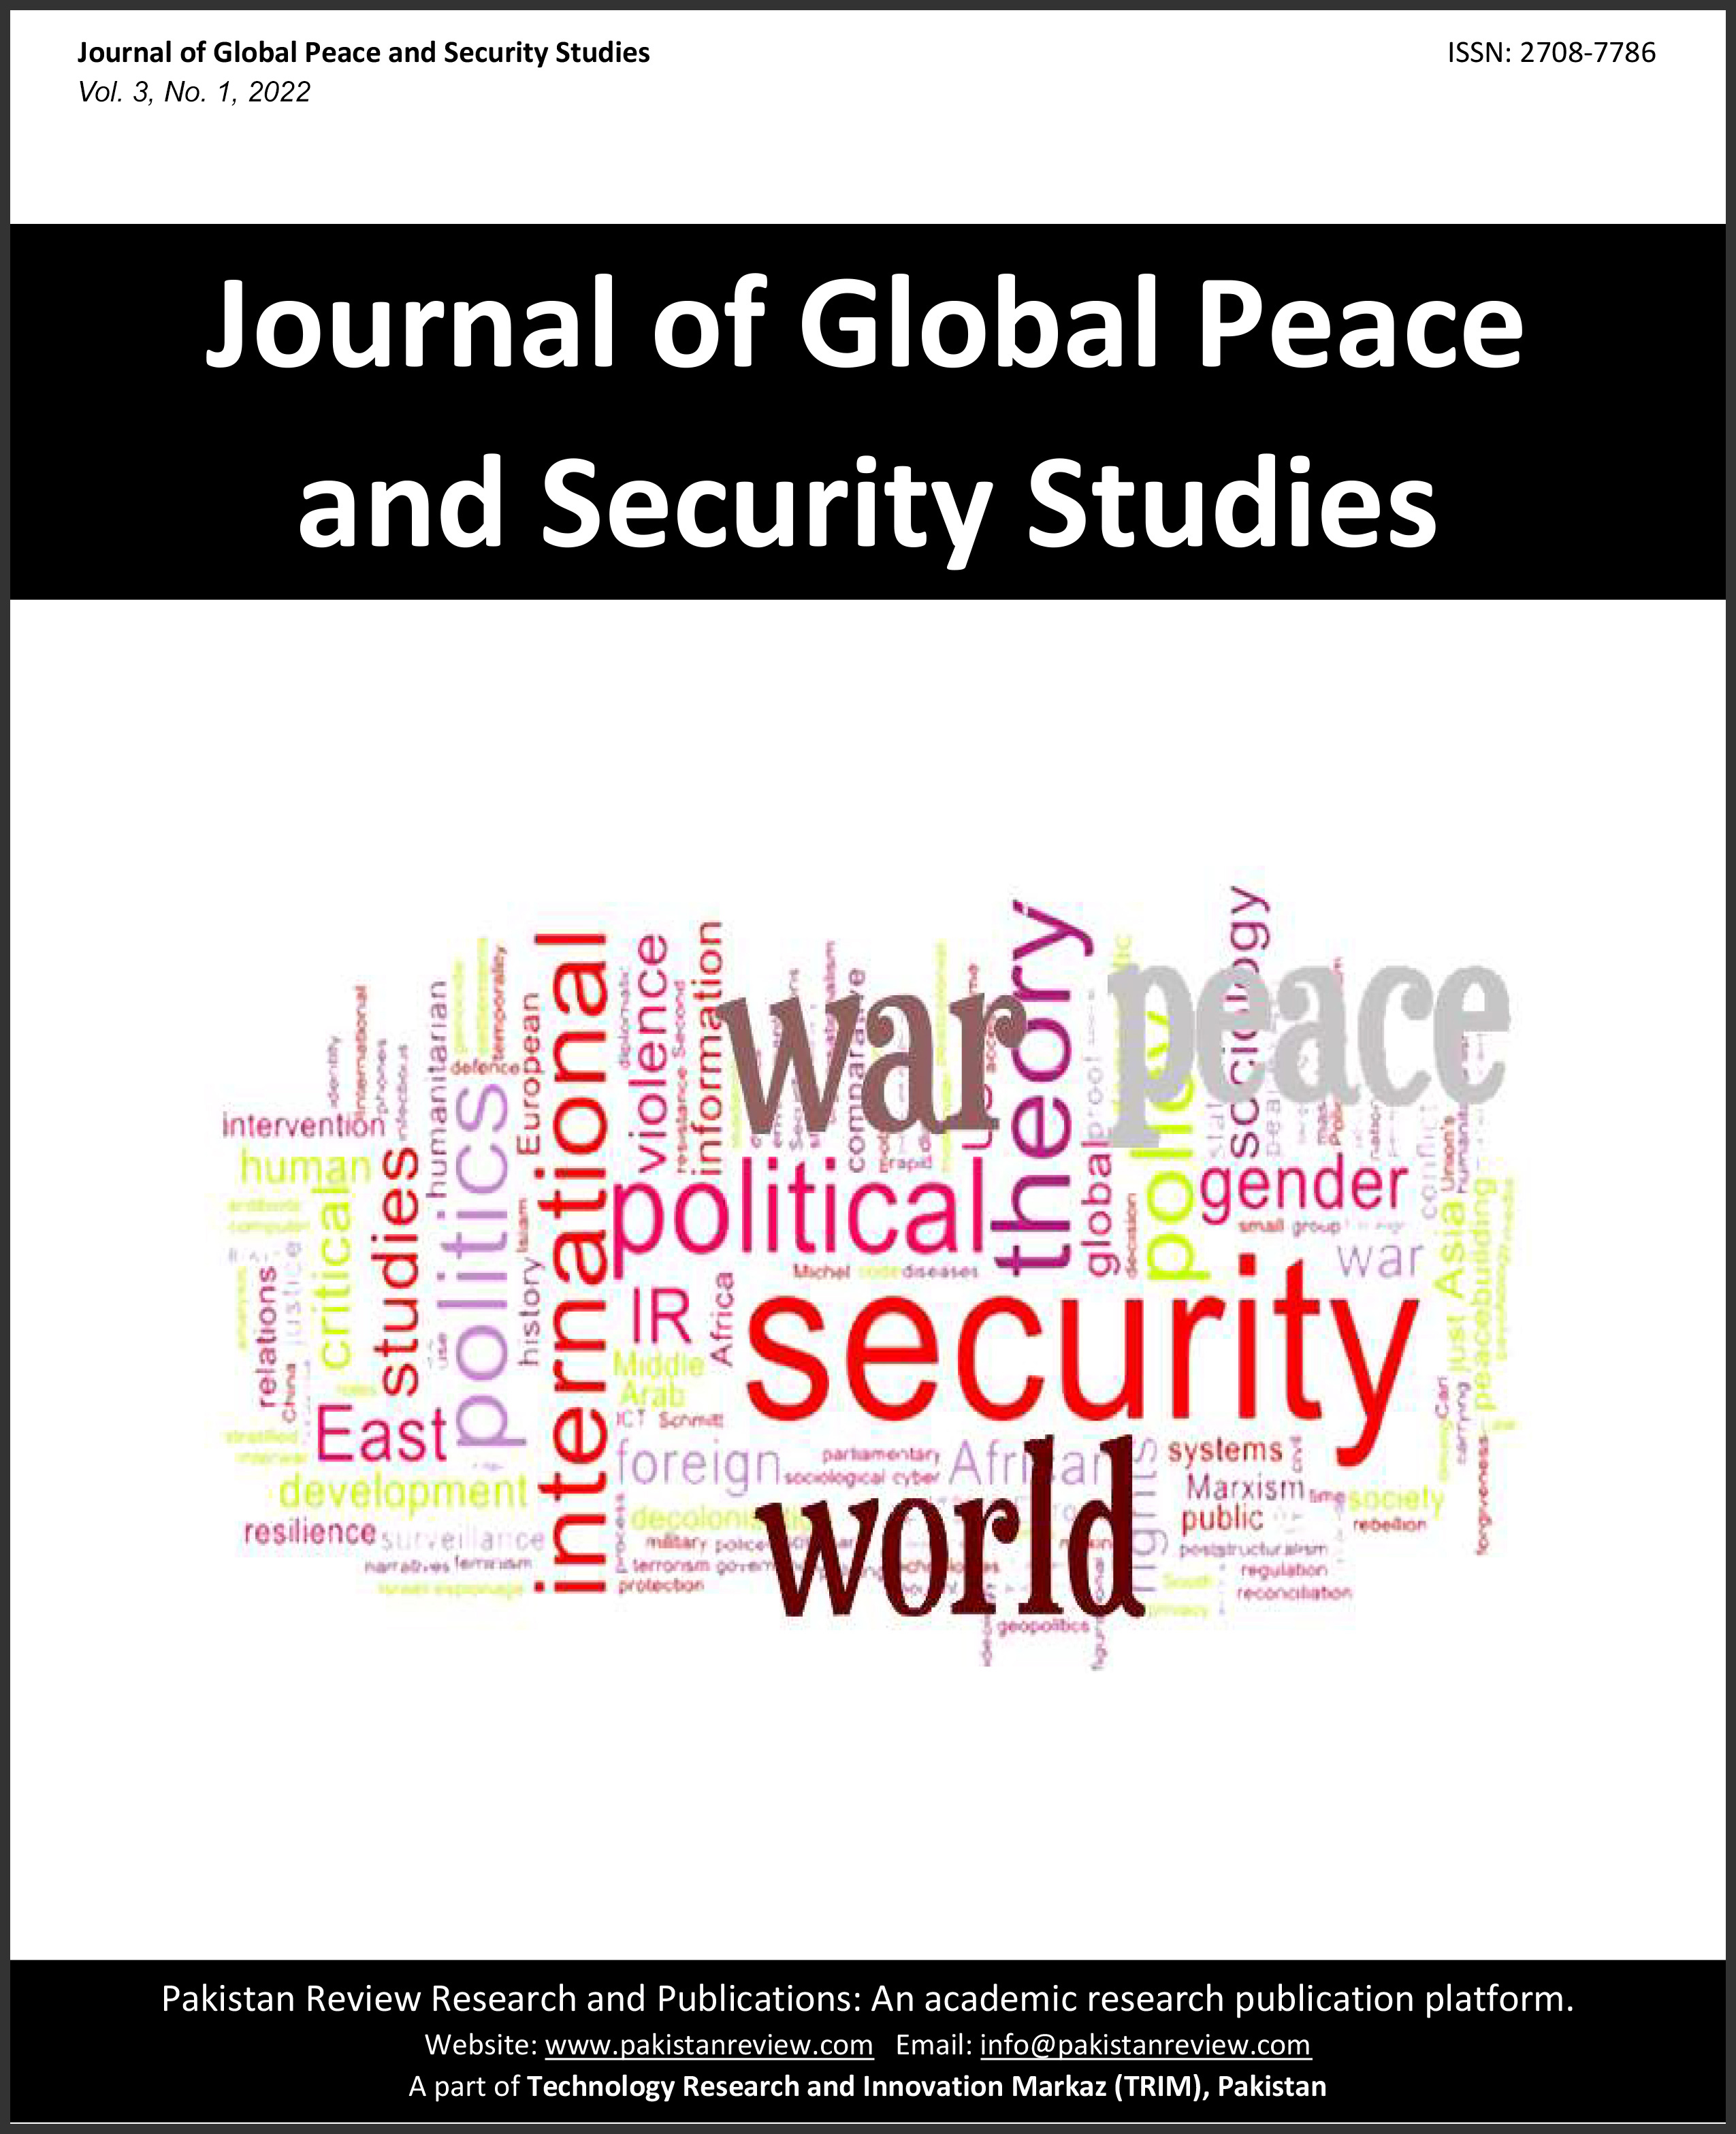 					View Vol. 3 No. 1 (2022): Journal of Global Peace and Security Studies (JGPSS)
				